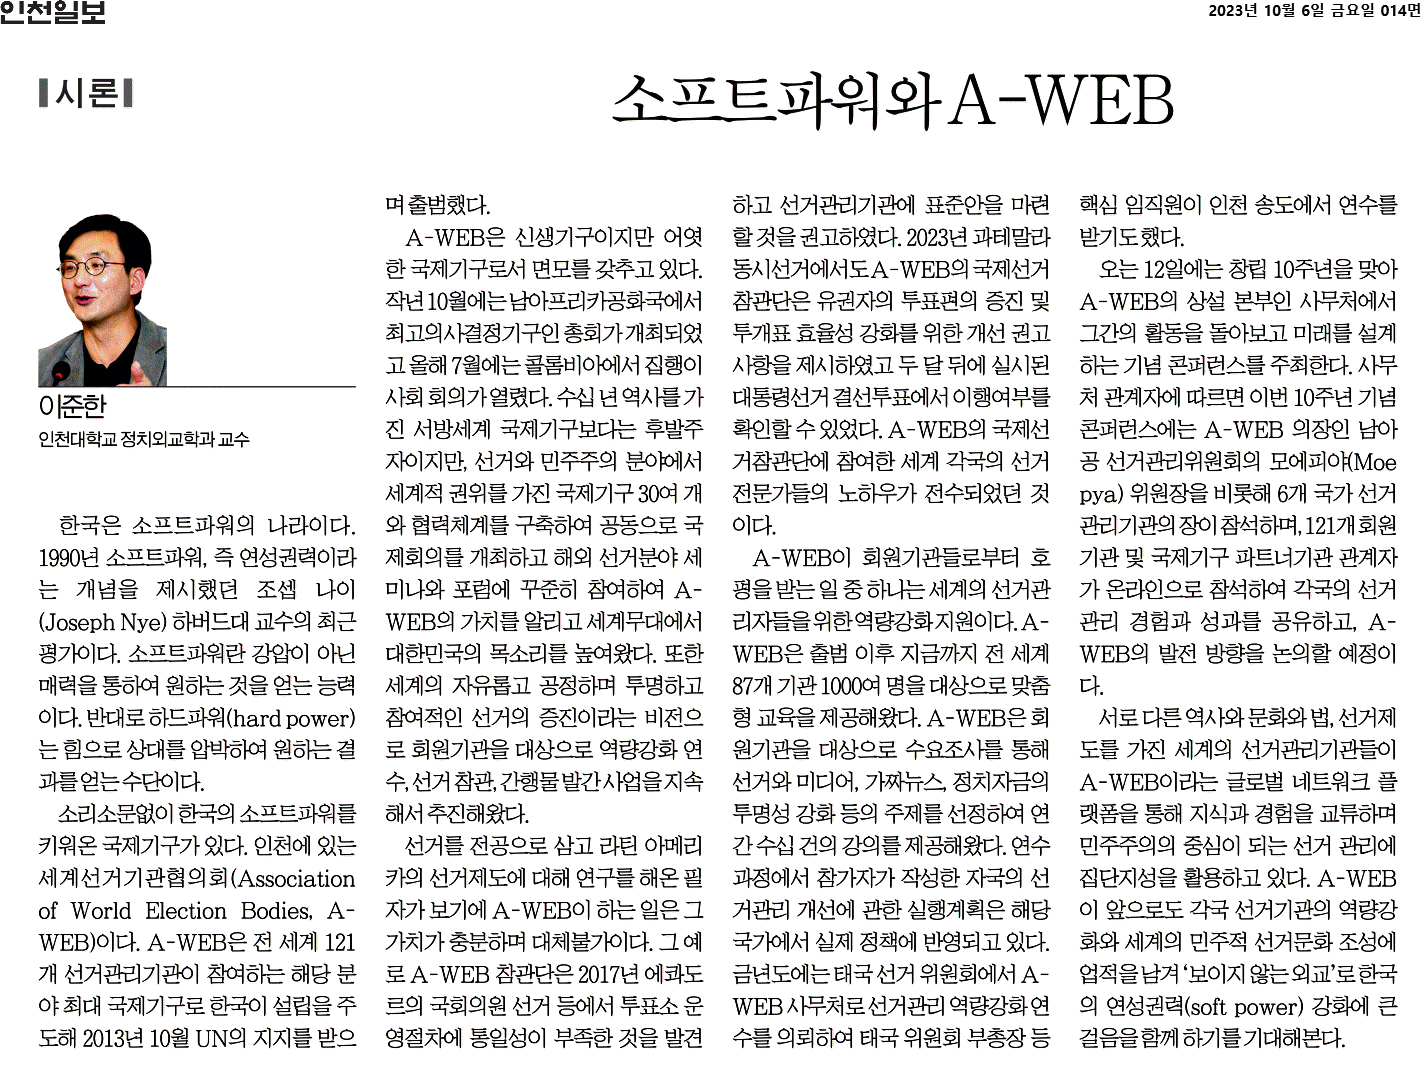 Soft power and A-WEB.png